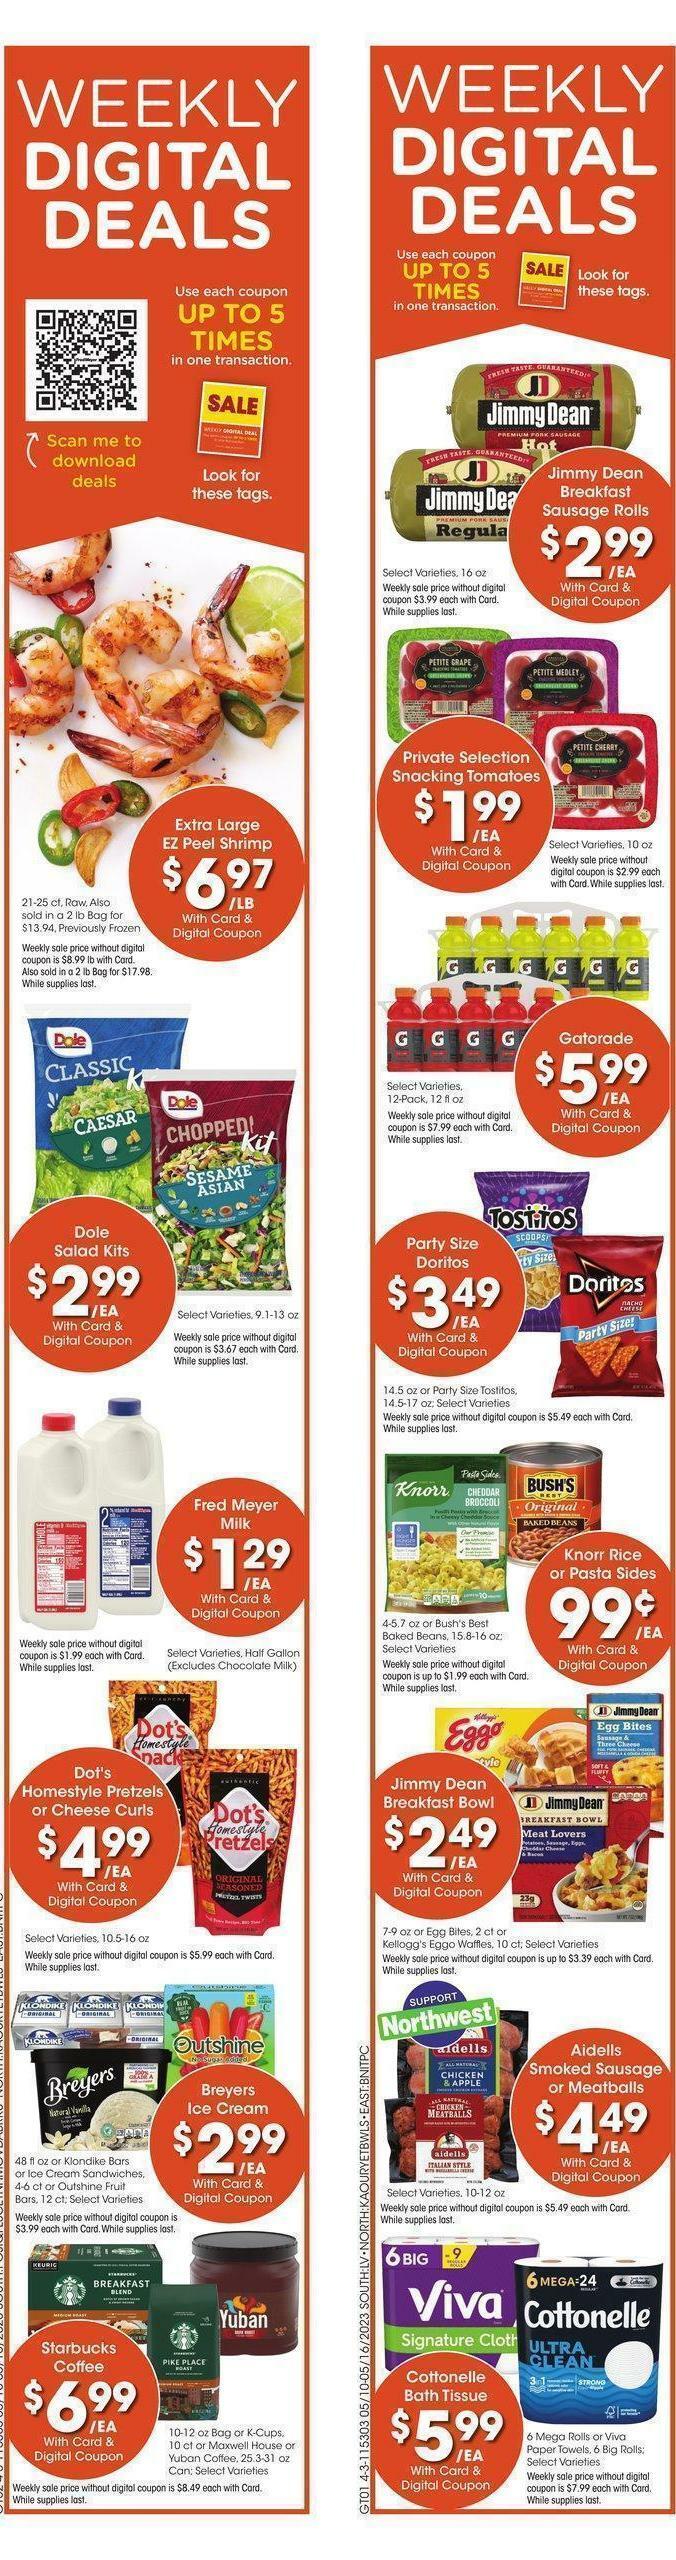 Fred Meyer Weekly Ad from May 10